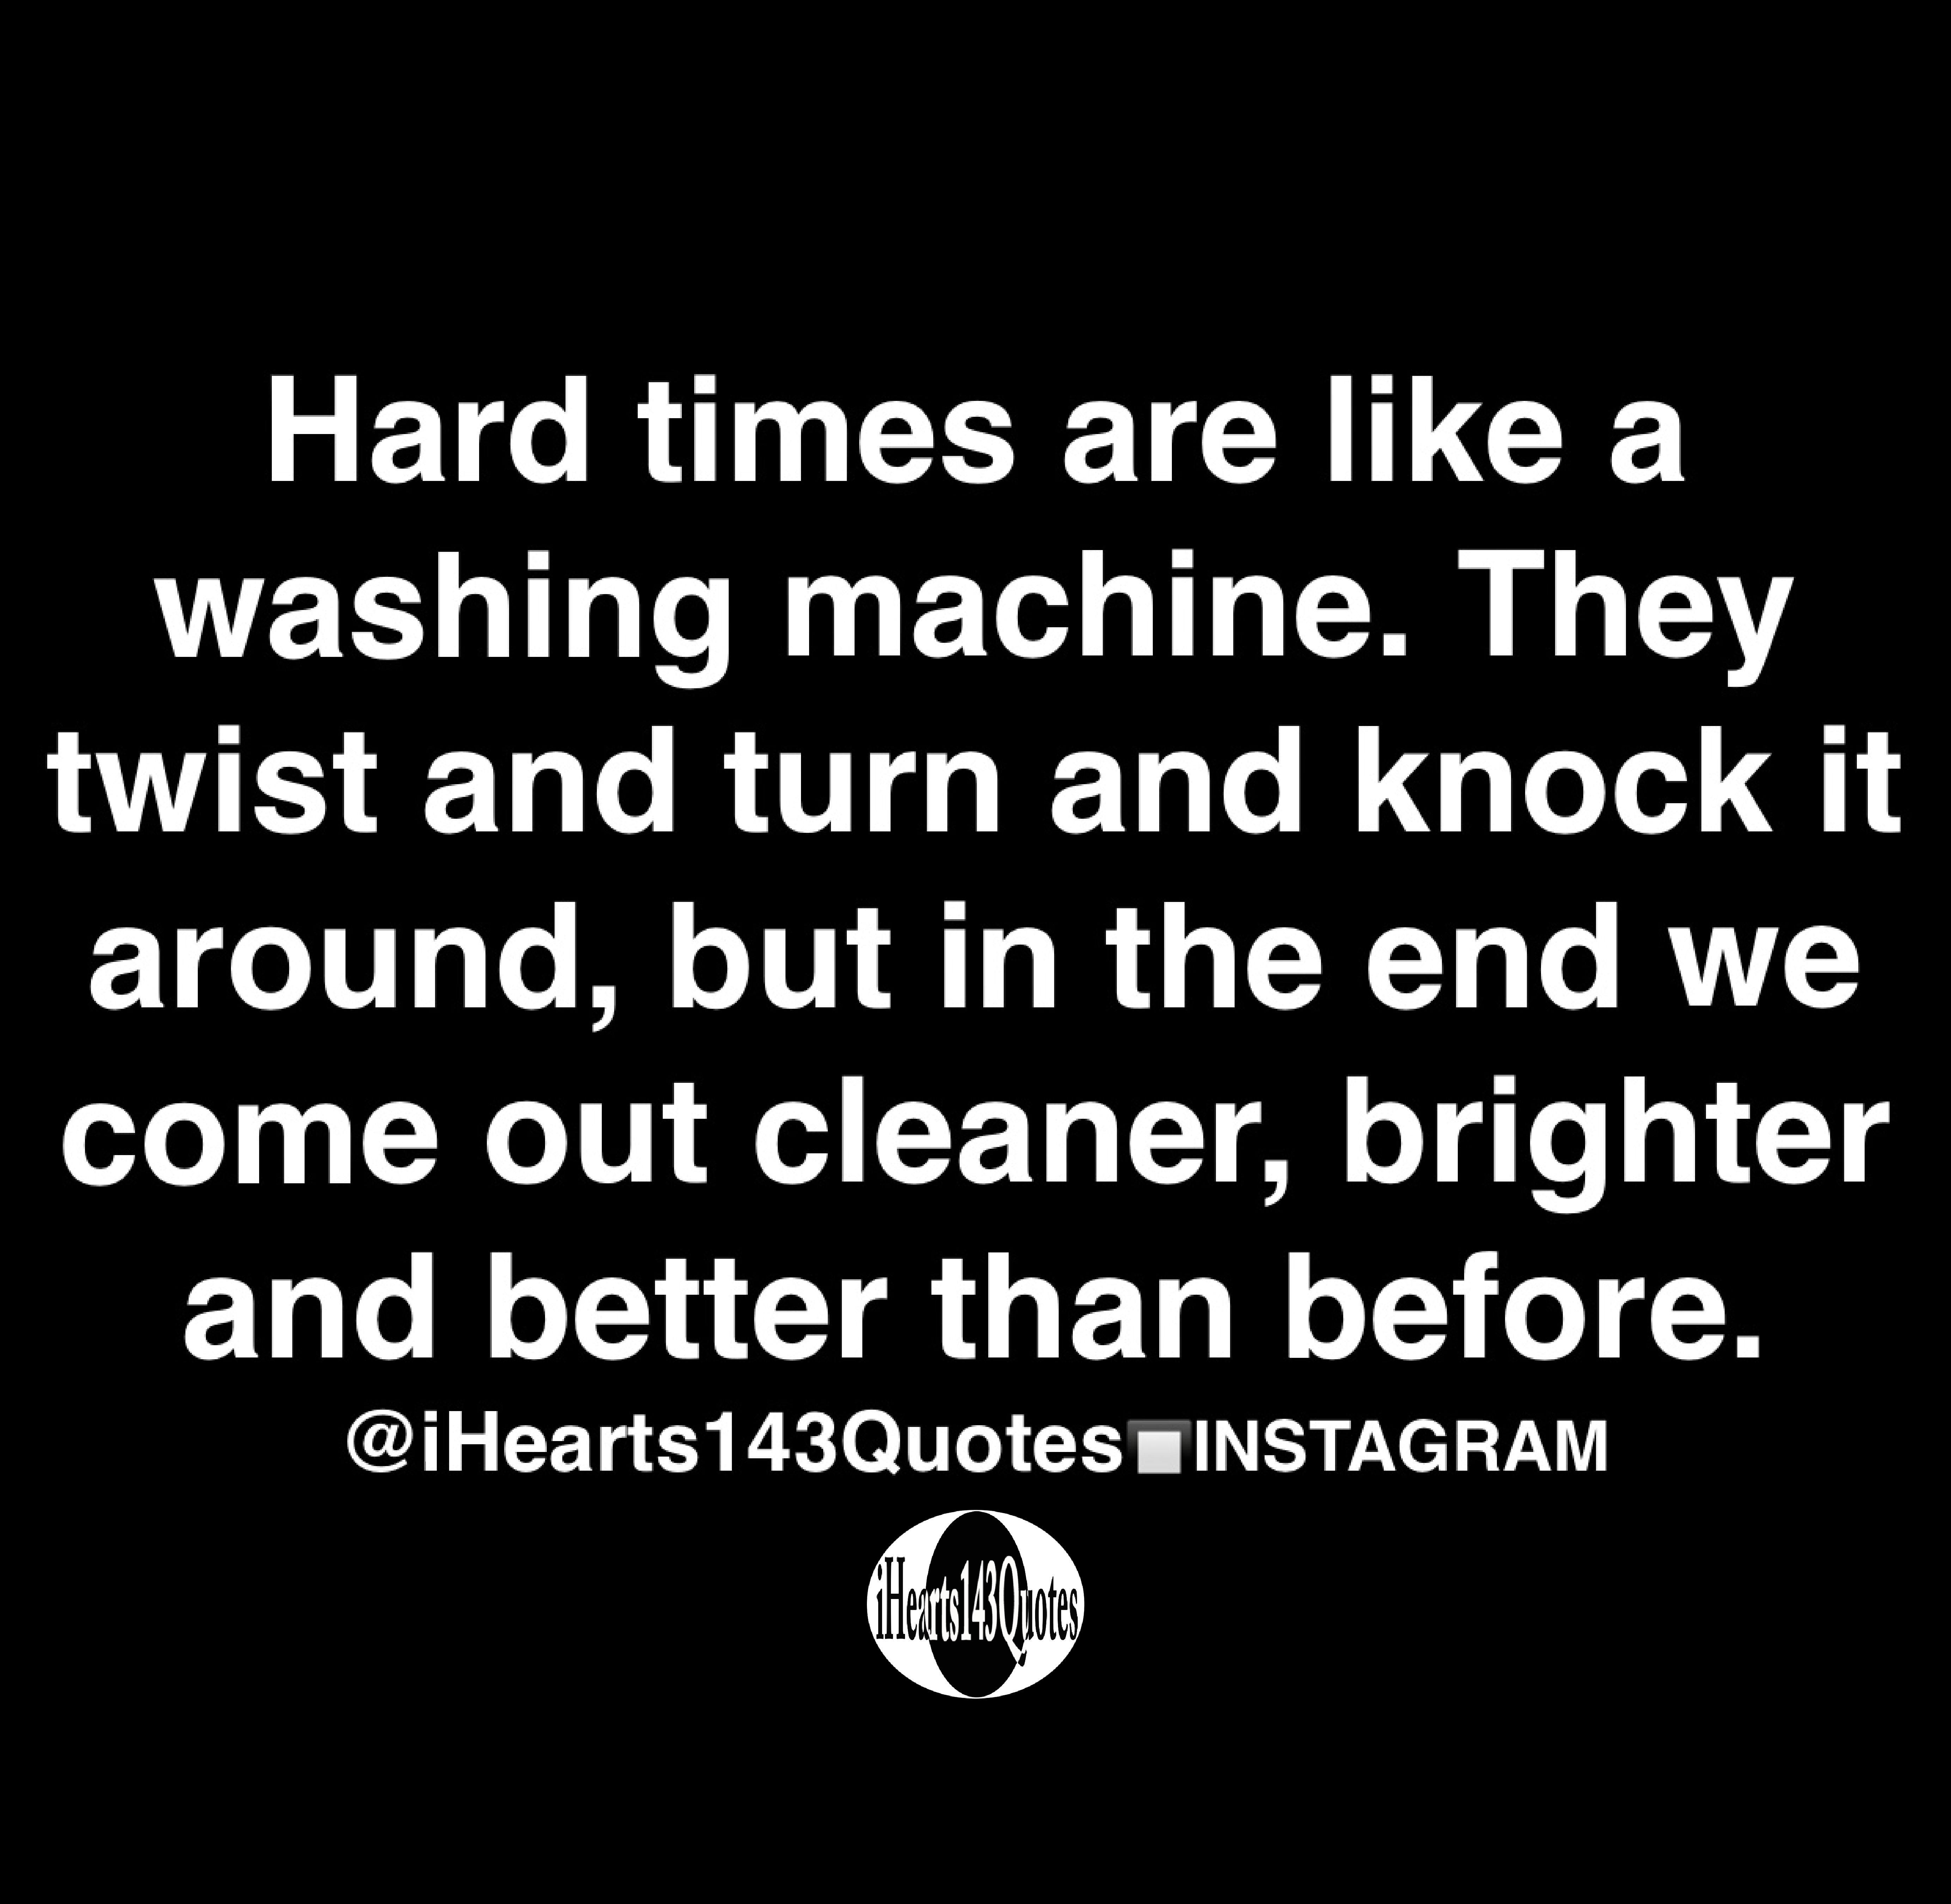 Hard times are like a washing machine. They twist and turn and knock it ...